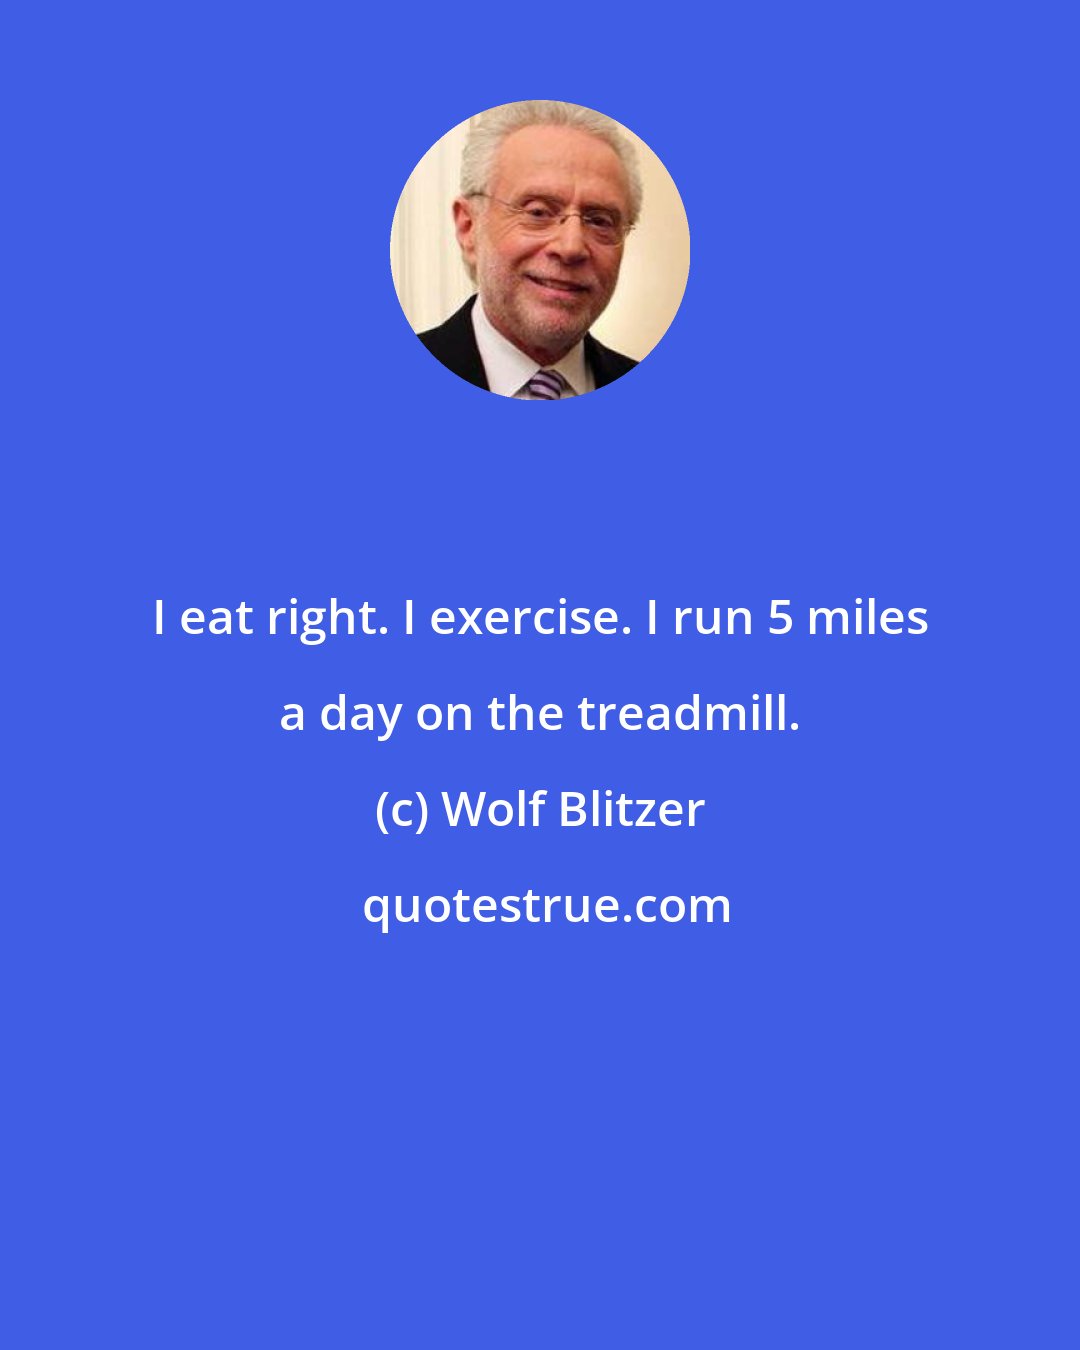 Wolf Blitzer: I eat right. I exercise. I run 5 miles a day on the treadmill.